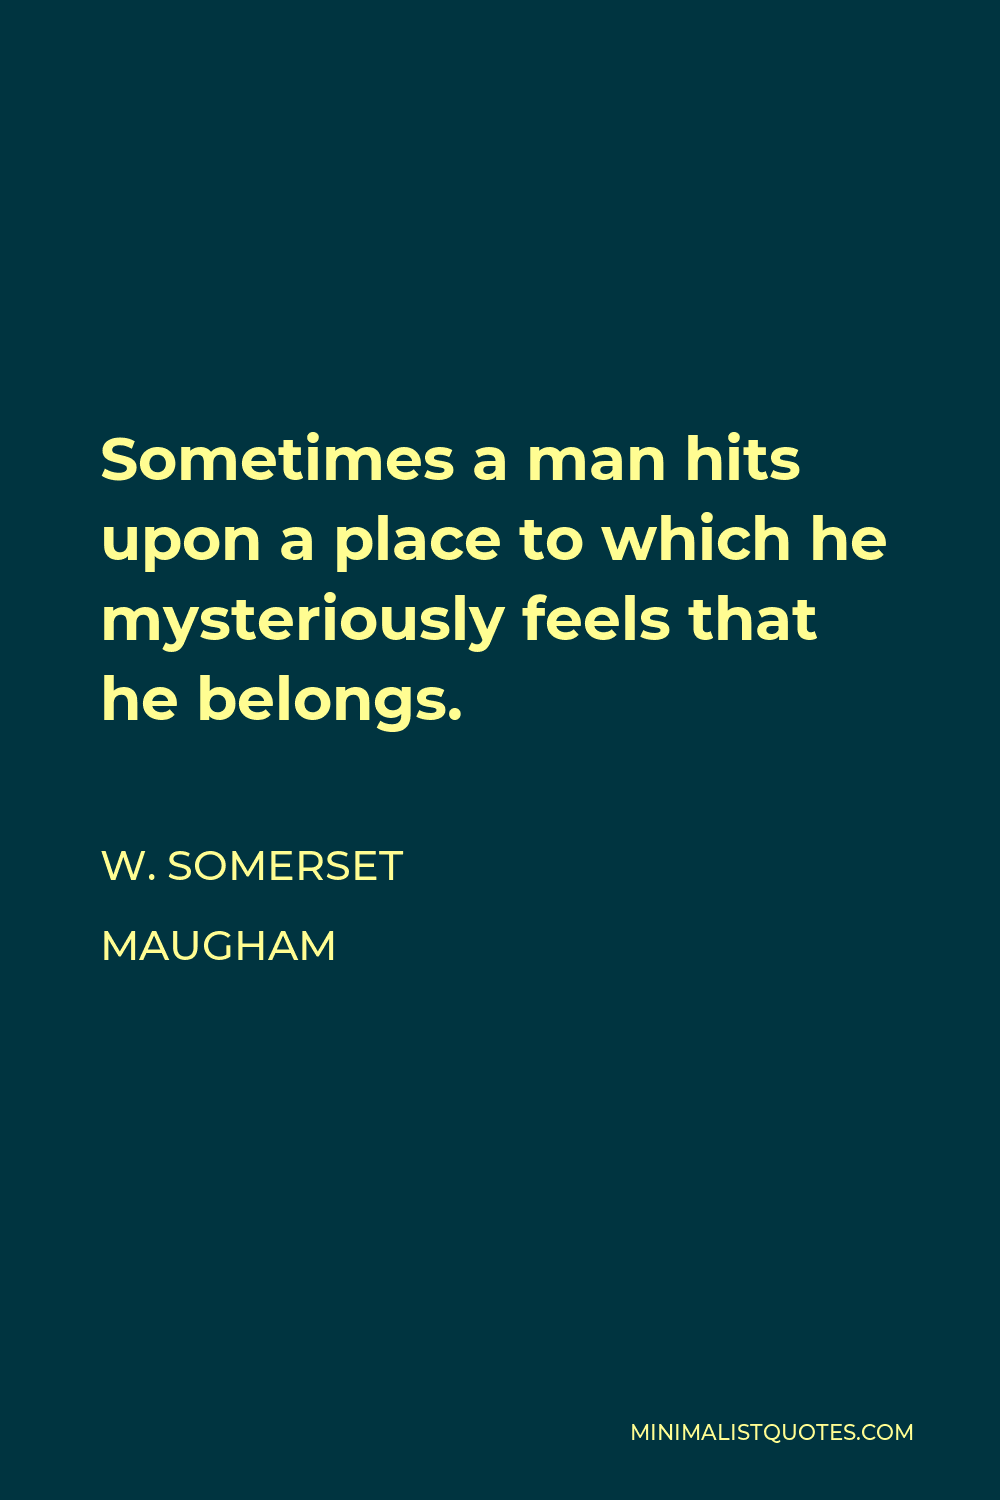 W. Somerset Maugham Quote - Sometimes a man hits upon a place to which he mysteriously feels that he belongs.